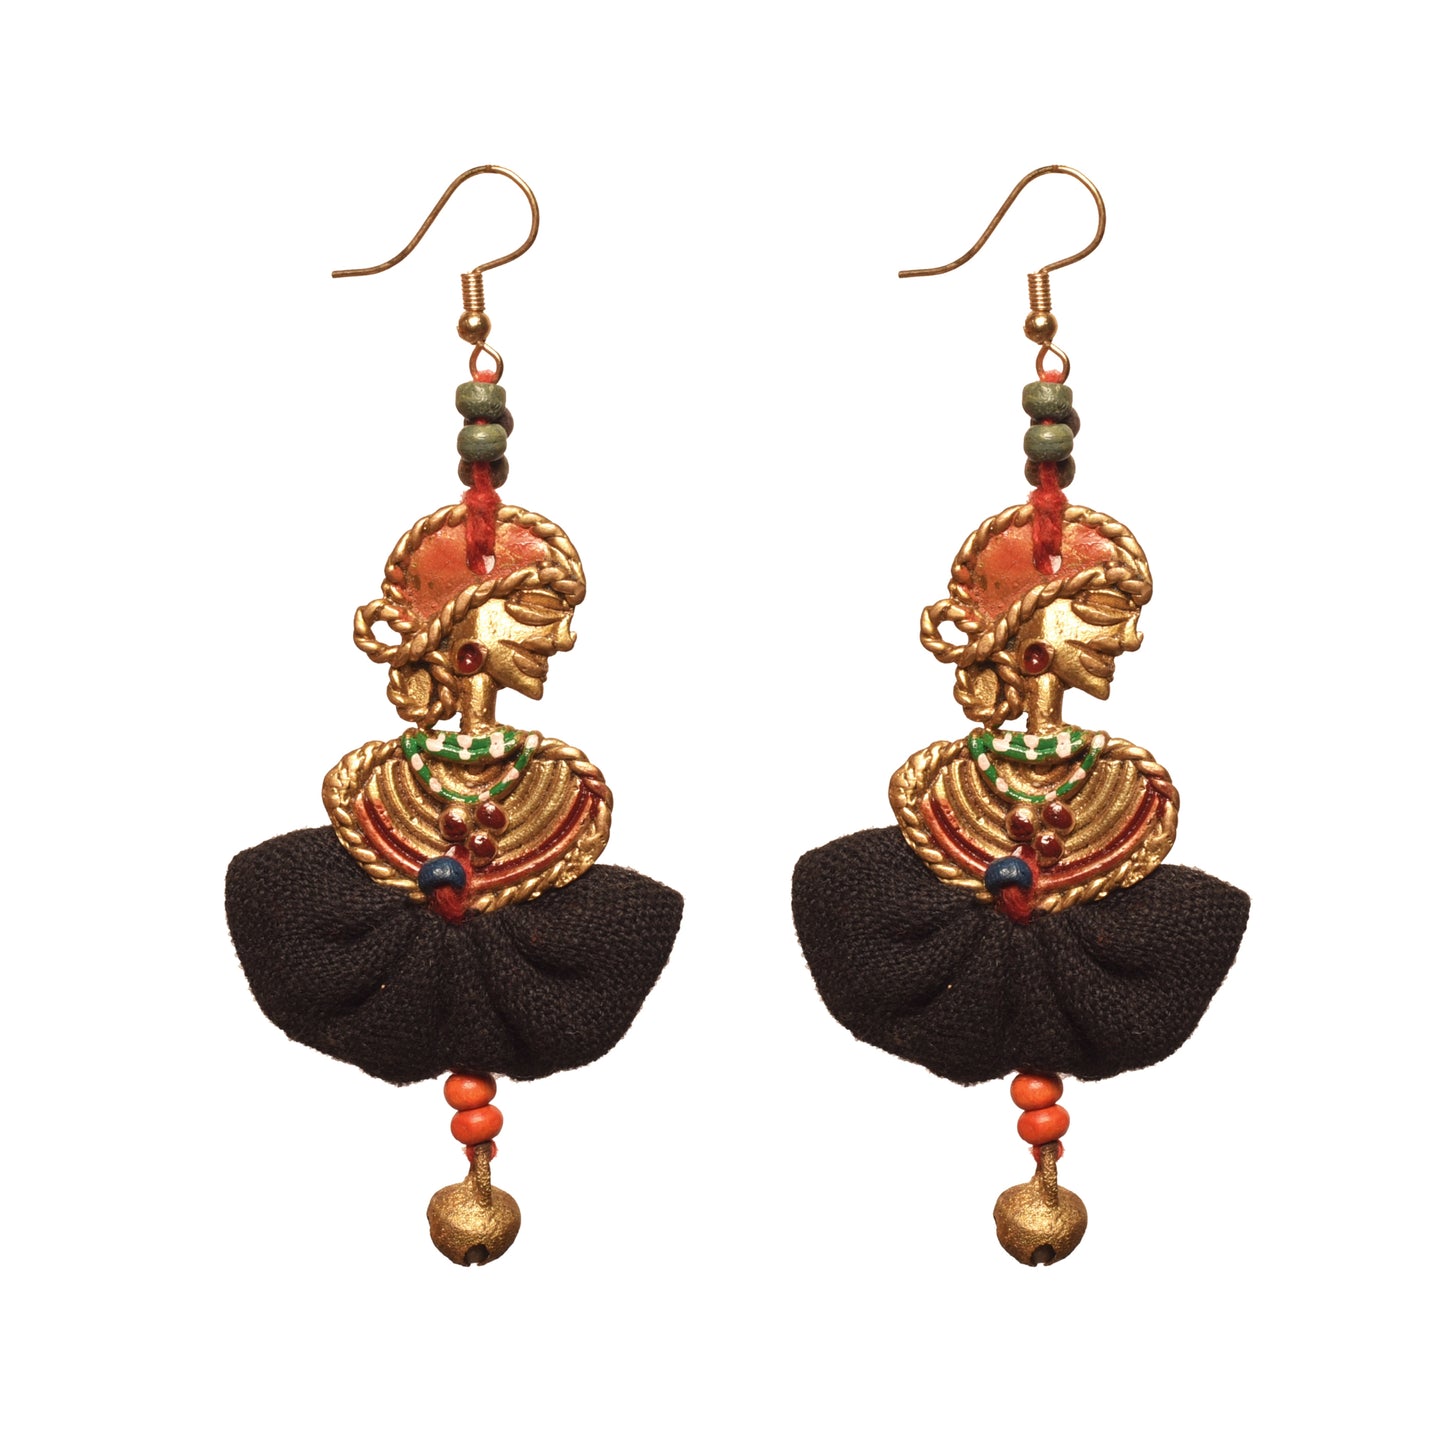 The Dancing Empress Handcrafted Tribal Dhokra Earrings in Jet Black